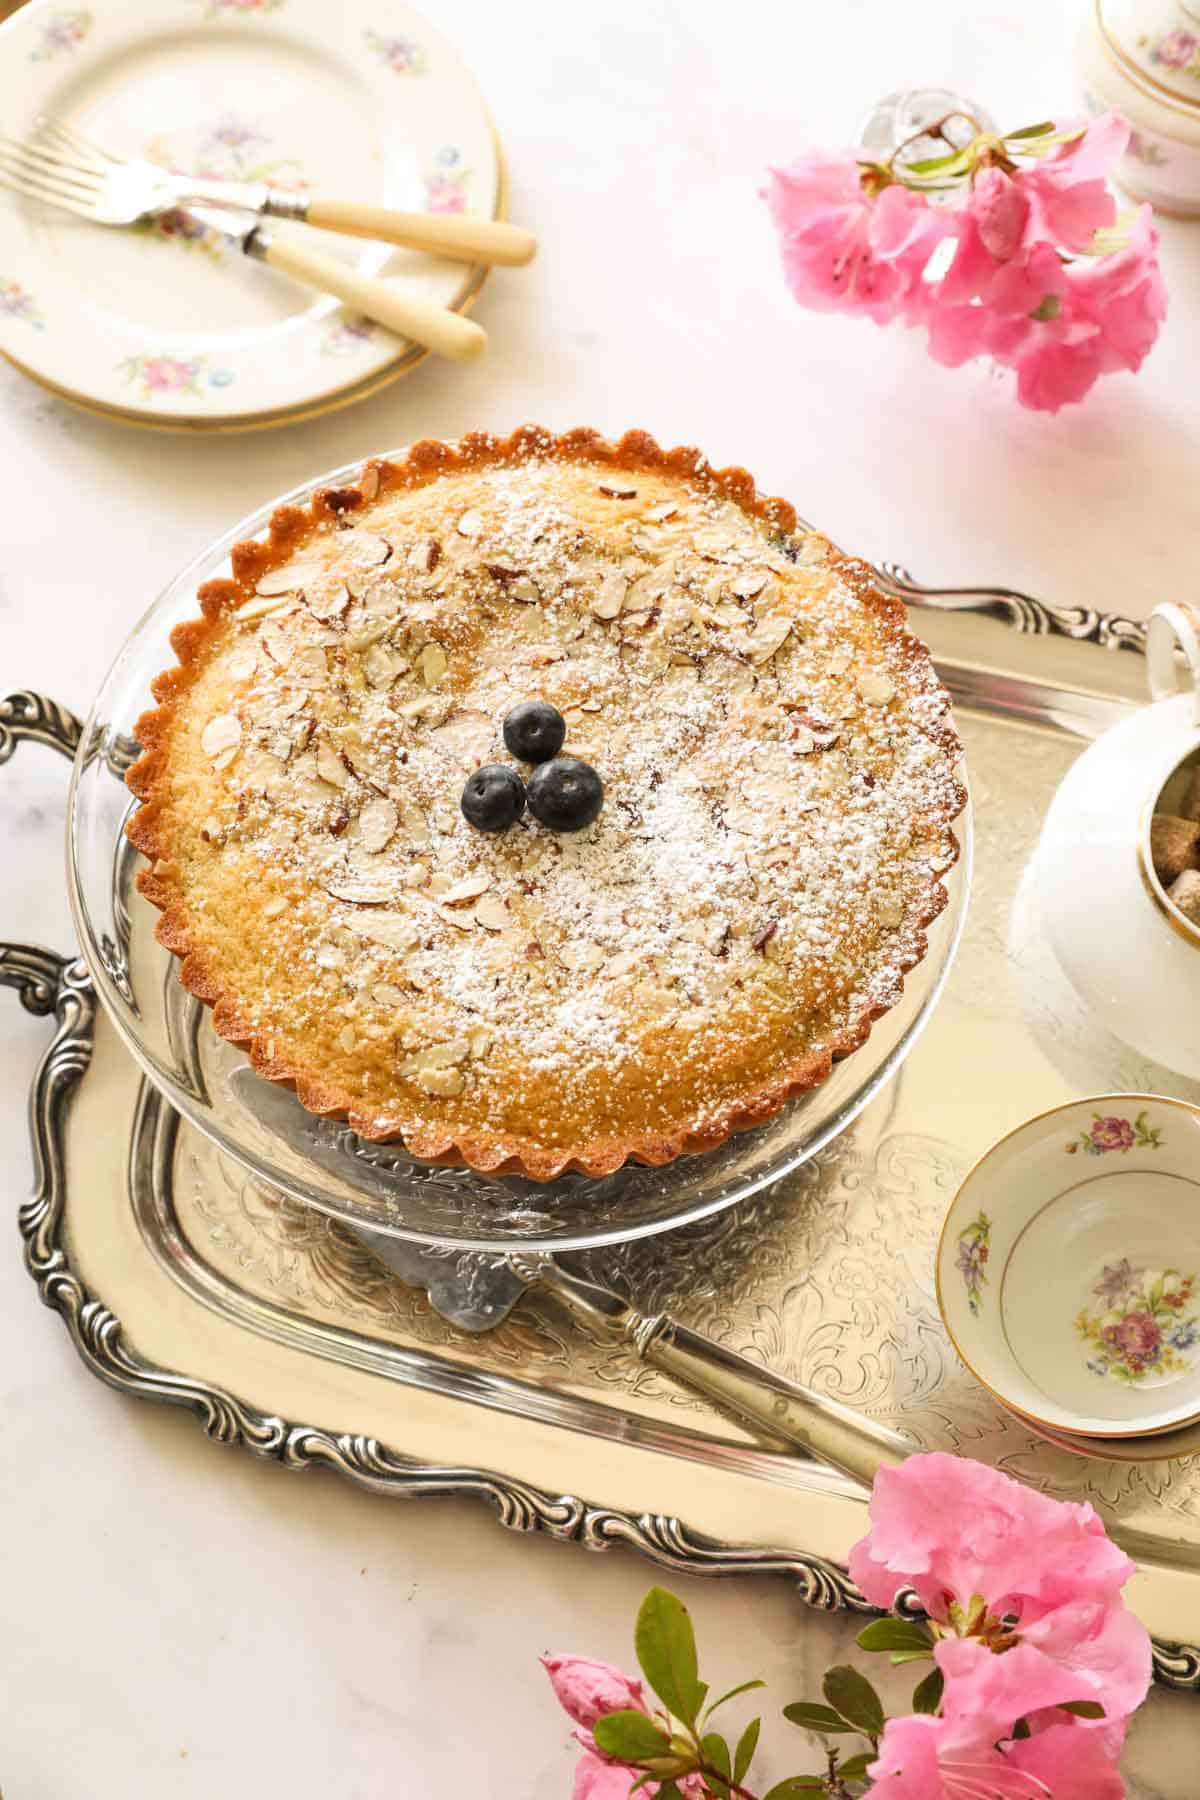 a blueberry almond cake on a glass cake stand on a tray with tea cups